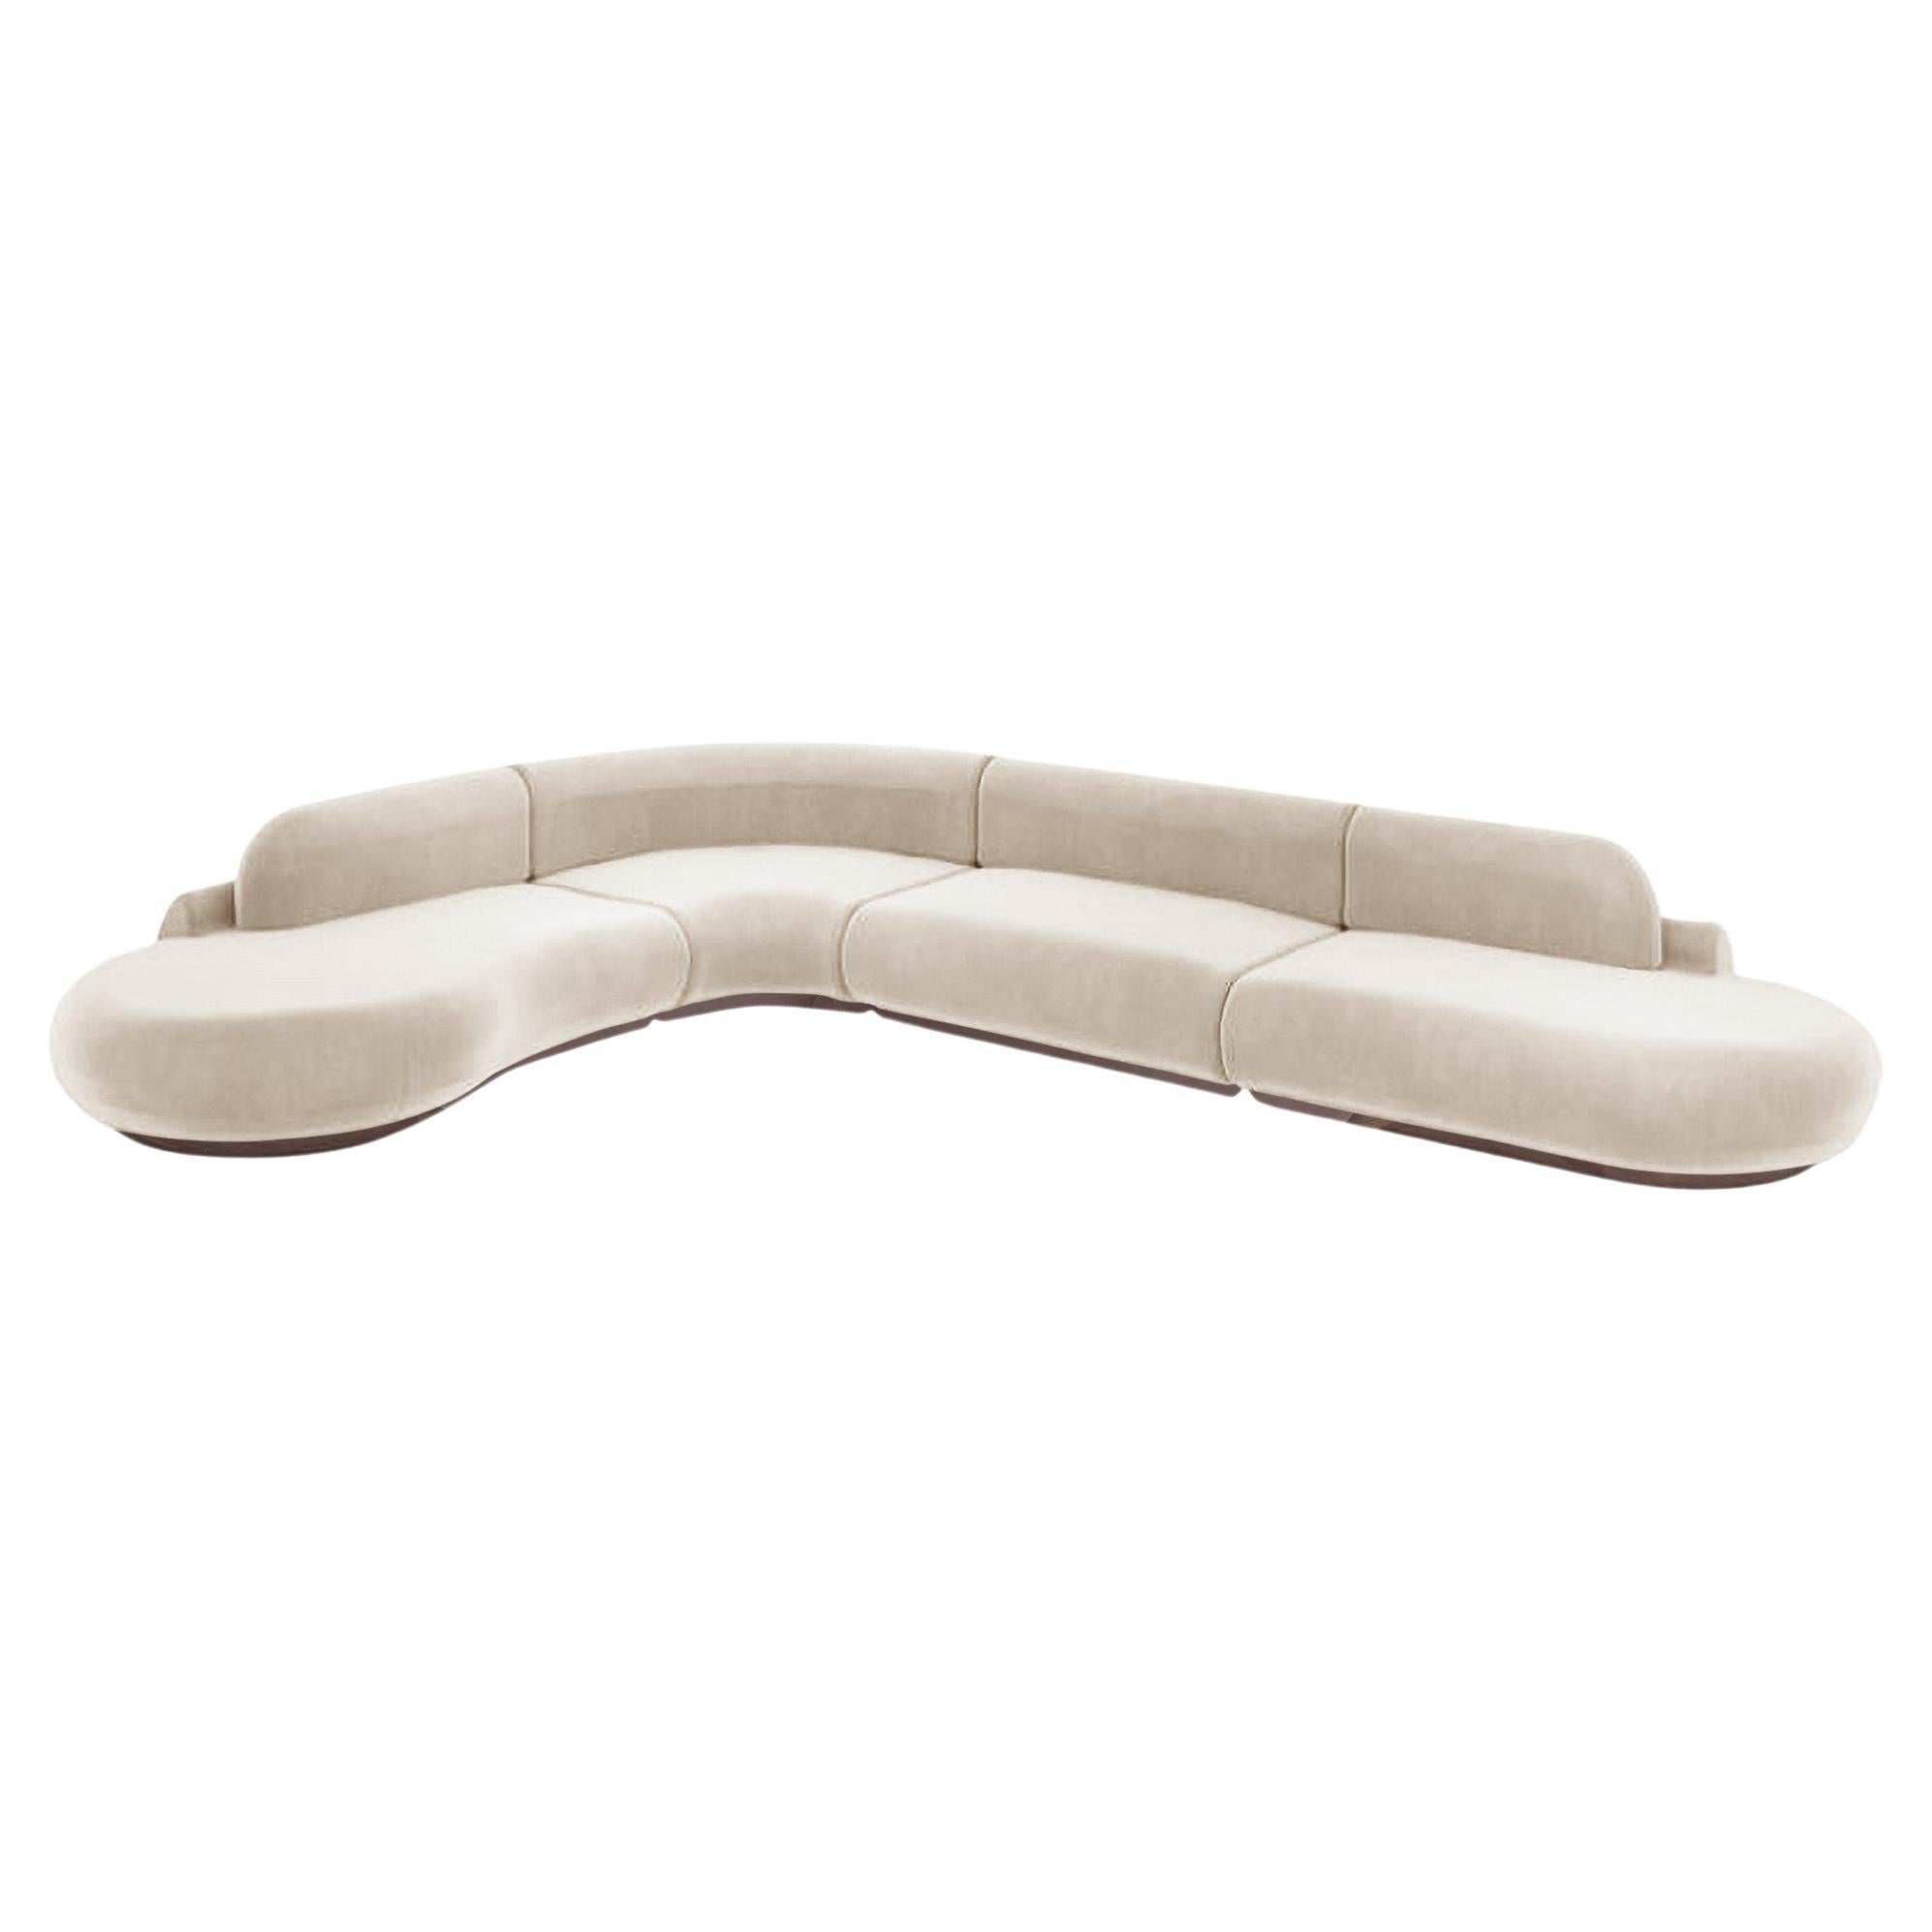 Naked Sectional Sofa, 4 Piece with Beech Ash-056-1 and Boucle Snow